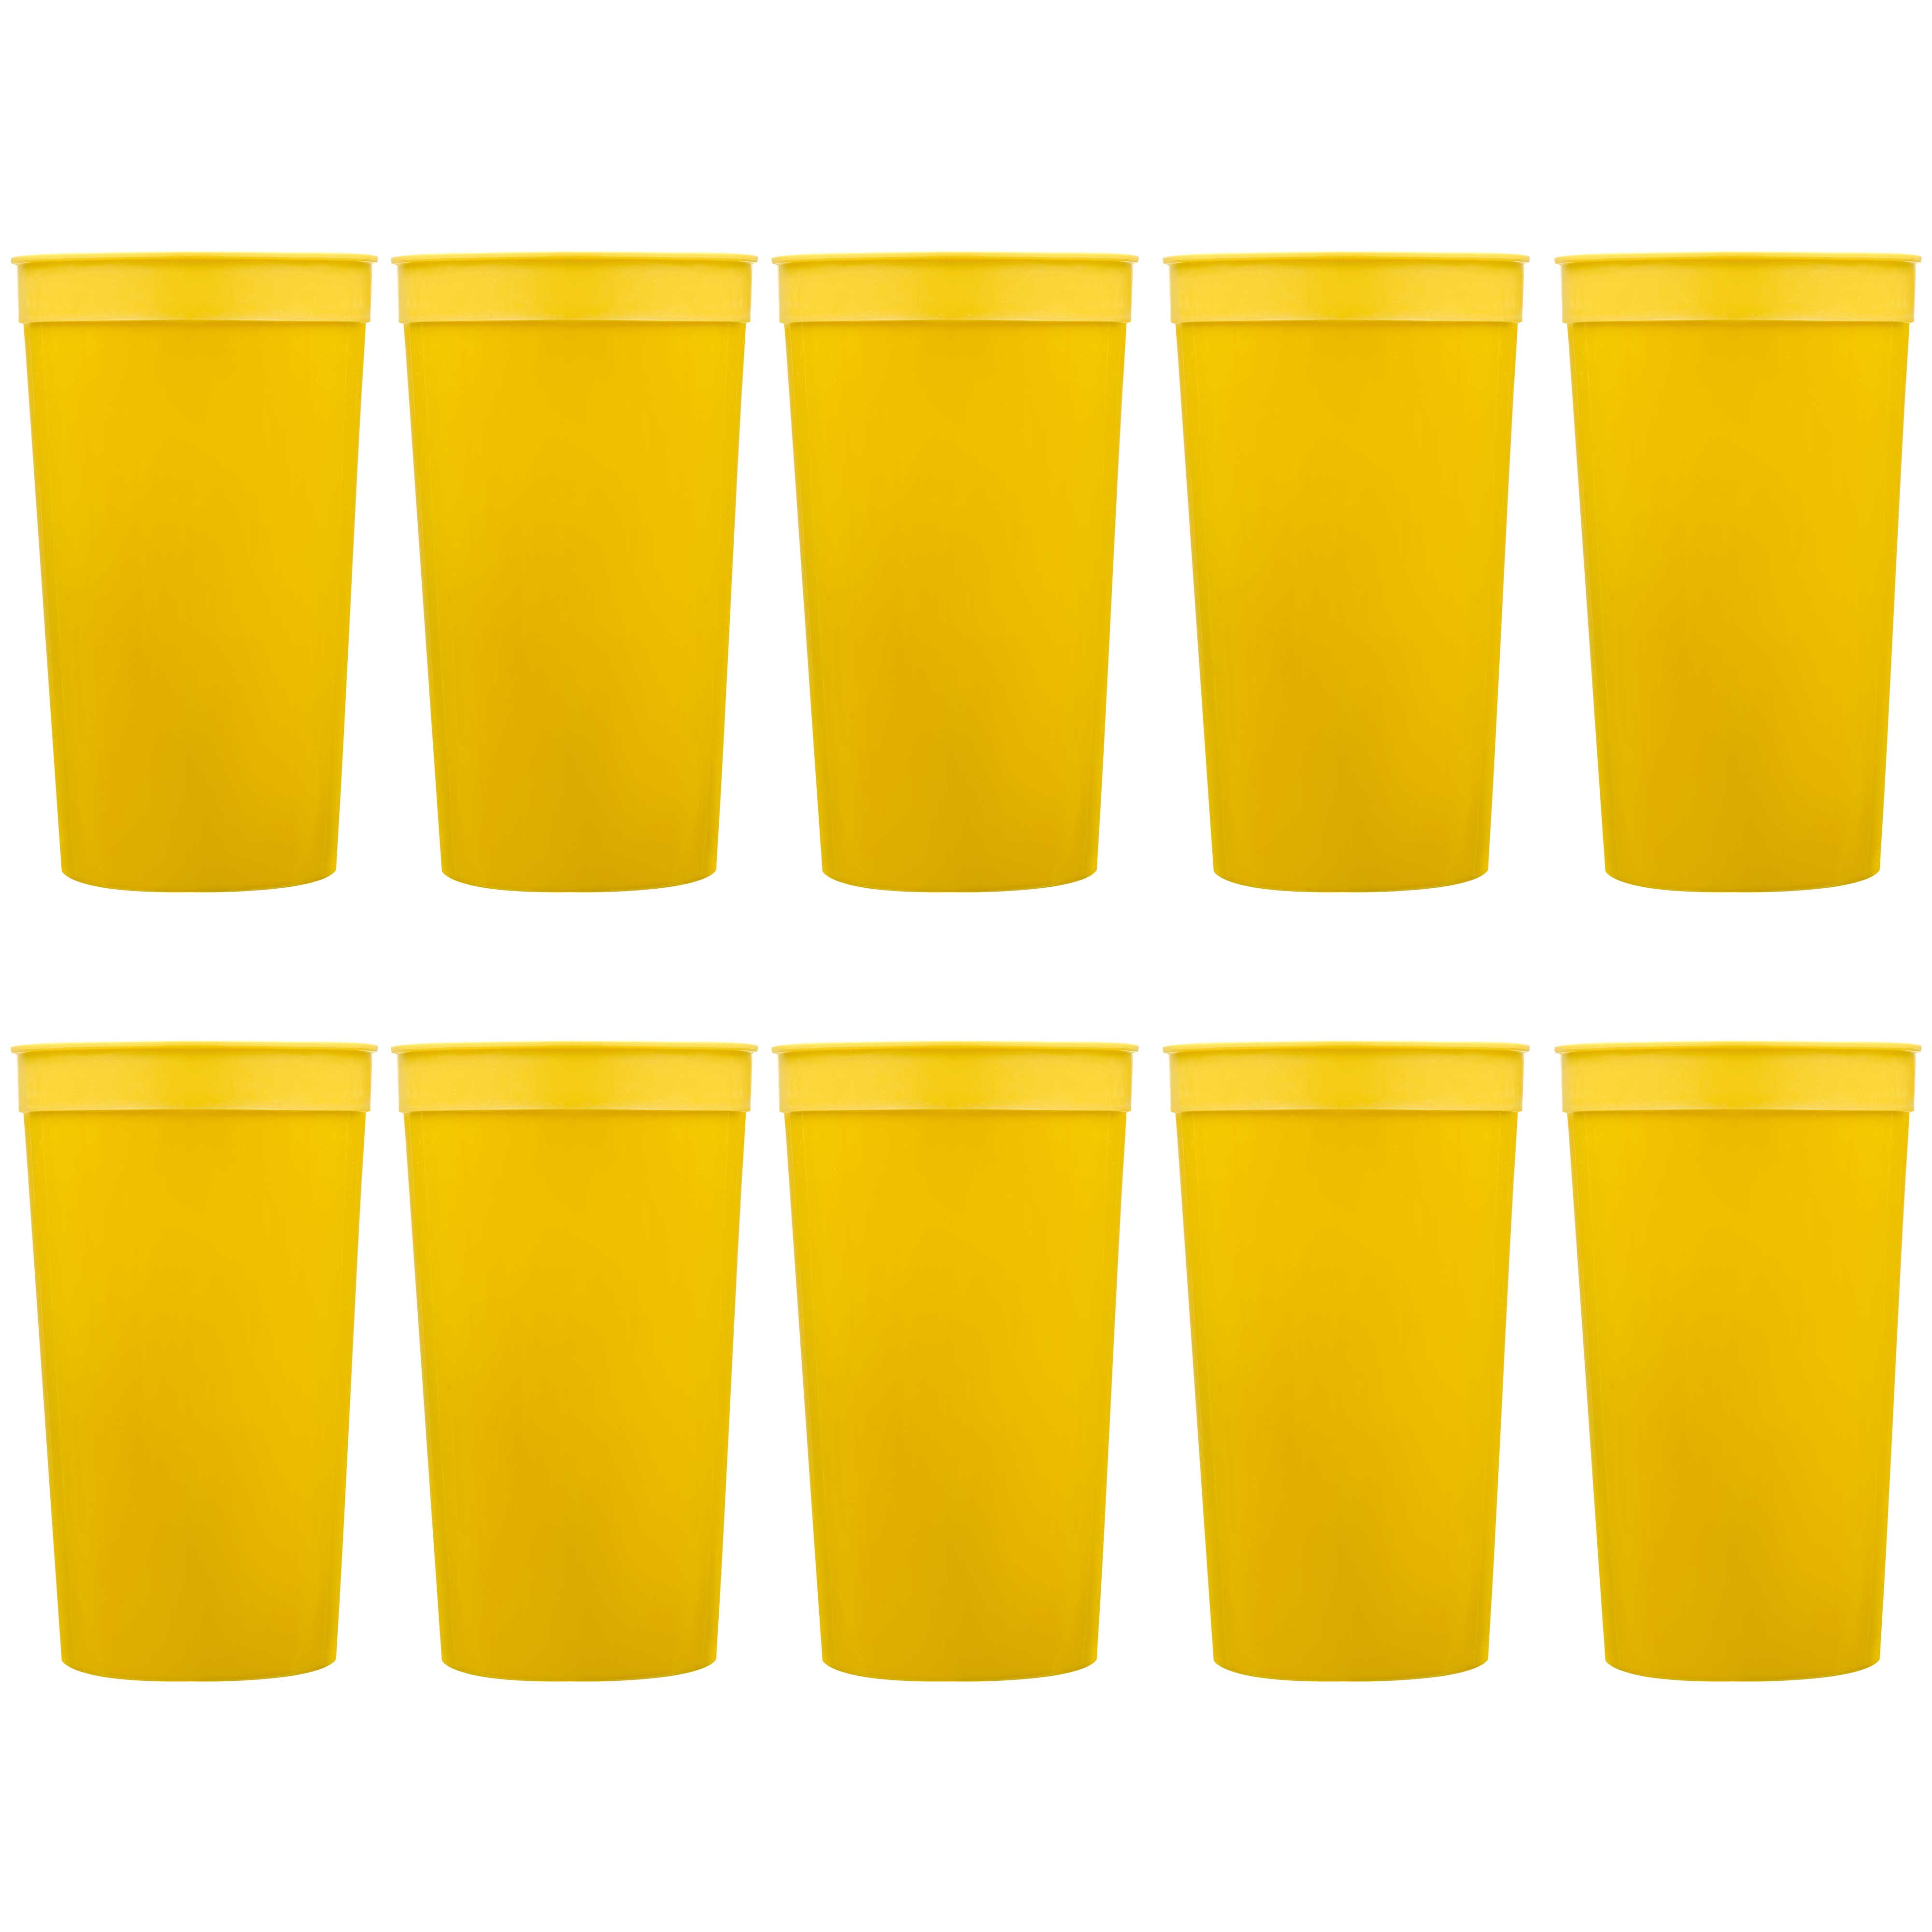 2 Yellow Solo Cups Heavy Plastic Stemmed Party Cups 16oz Brand New w/Label